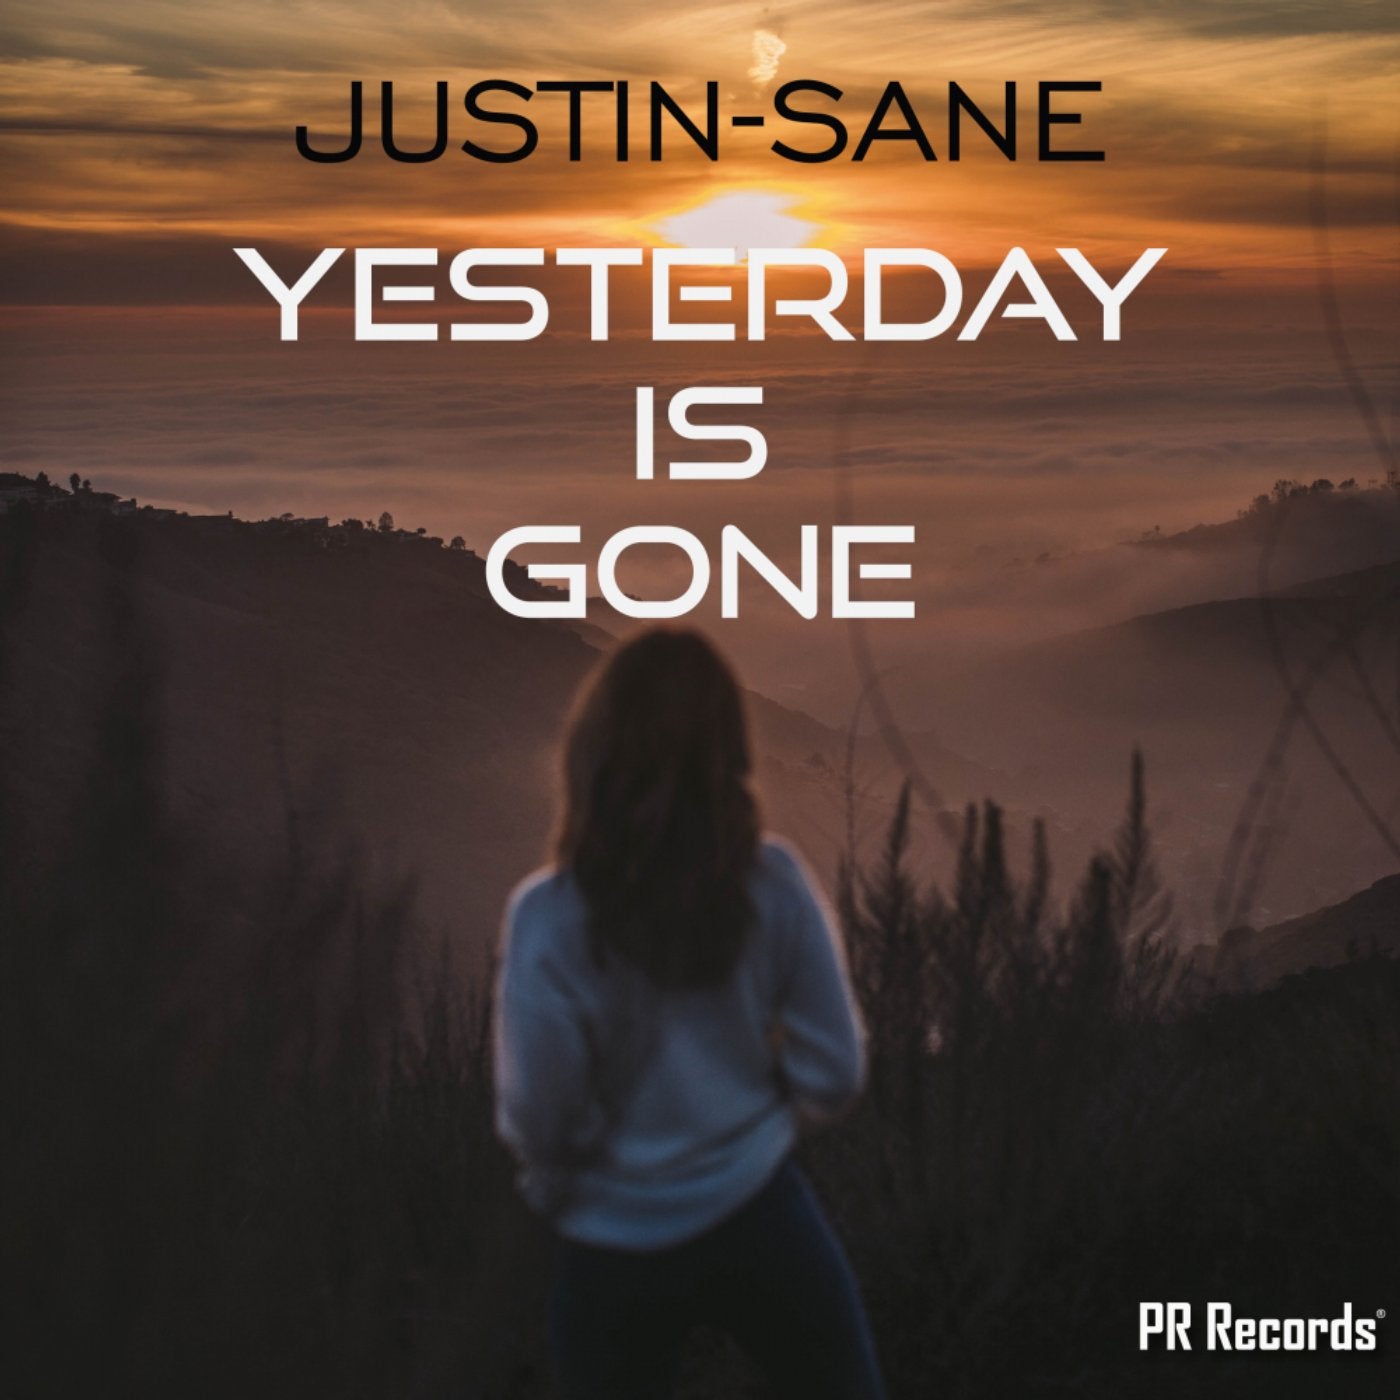 Yesterday is gone